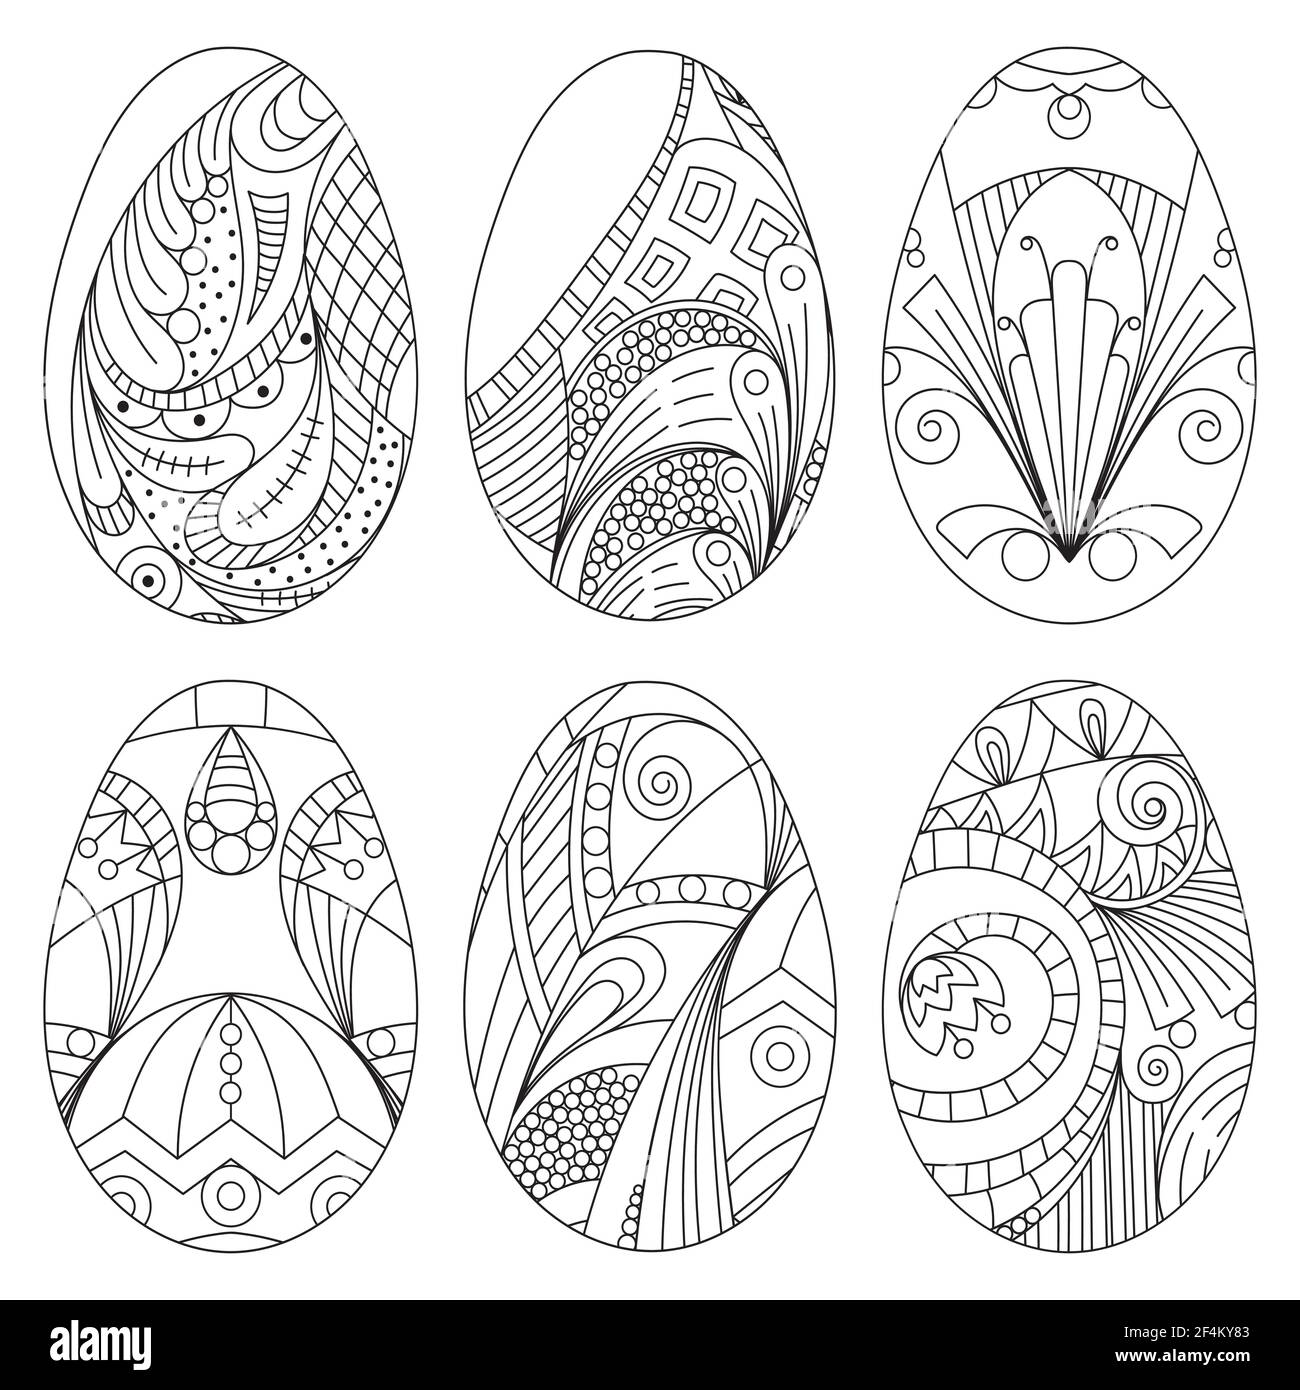 Zentangle vector easter eggs for coloring book for adult. Stock Vector